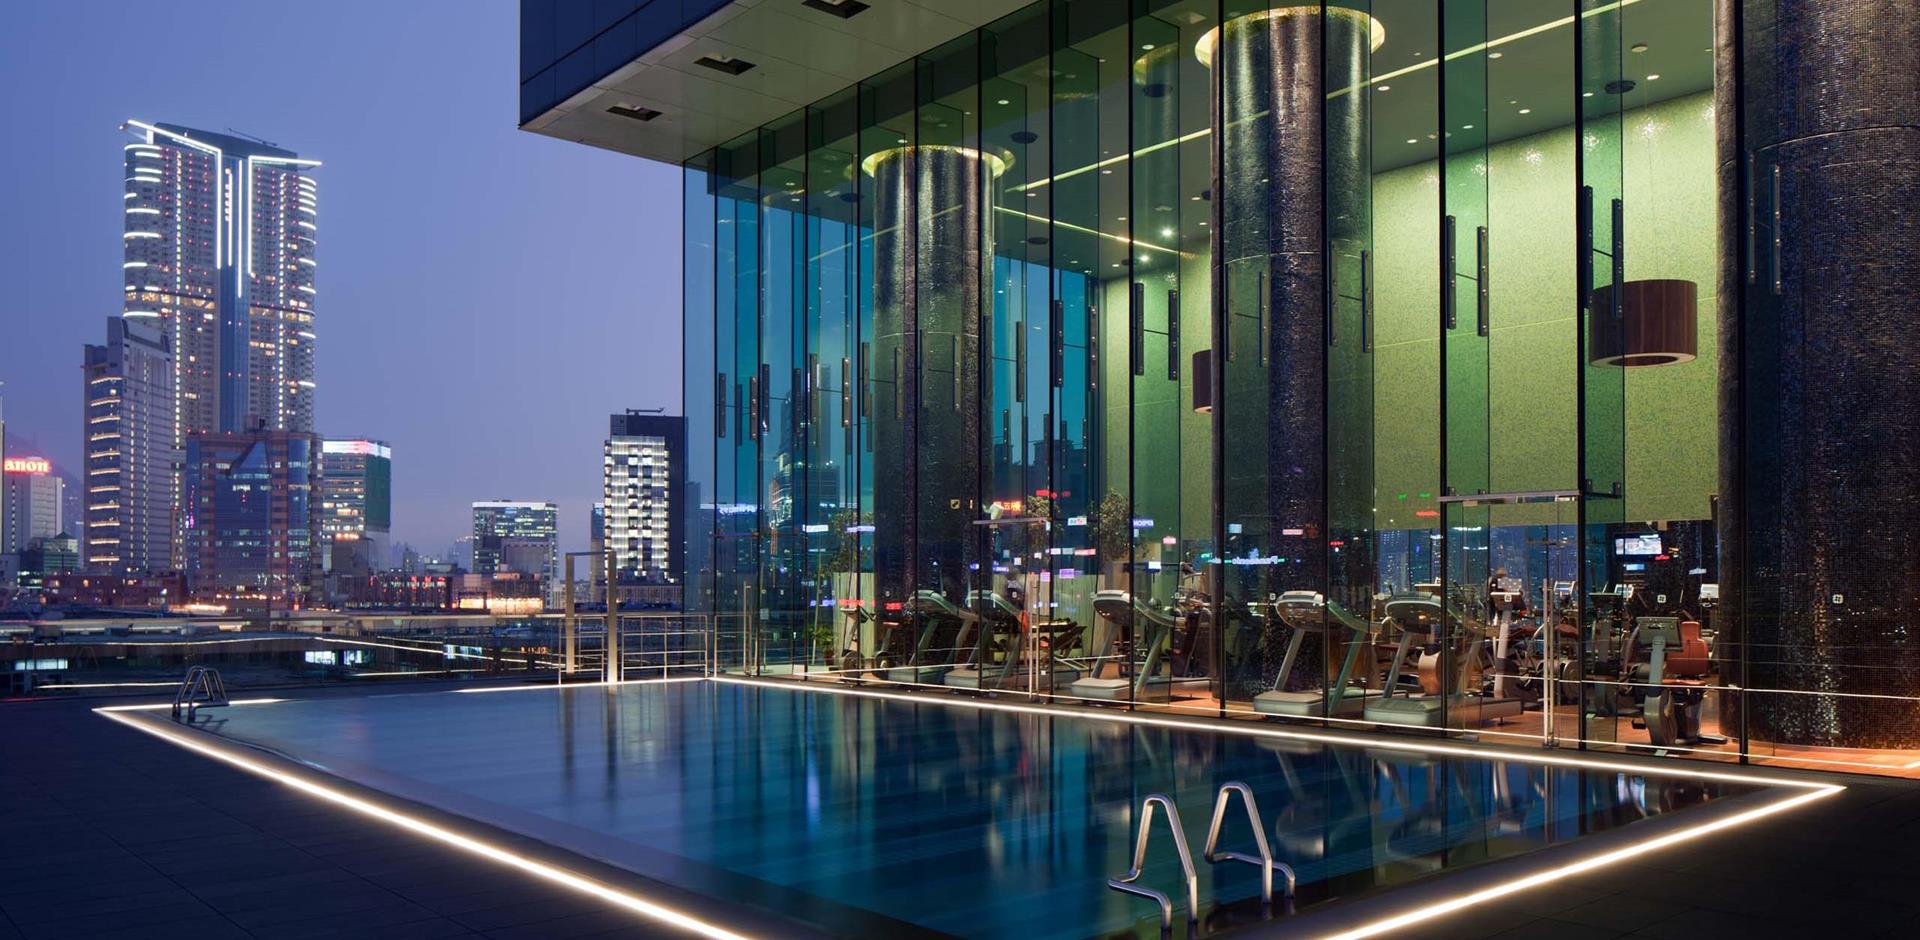 Pool and exterior, Hotel ICON, China, A&K